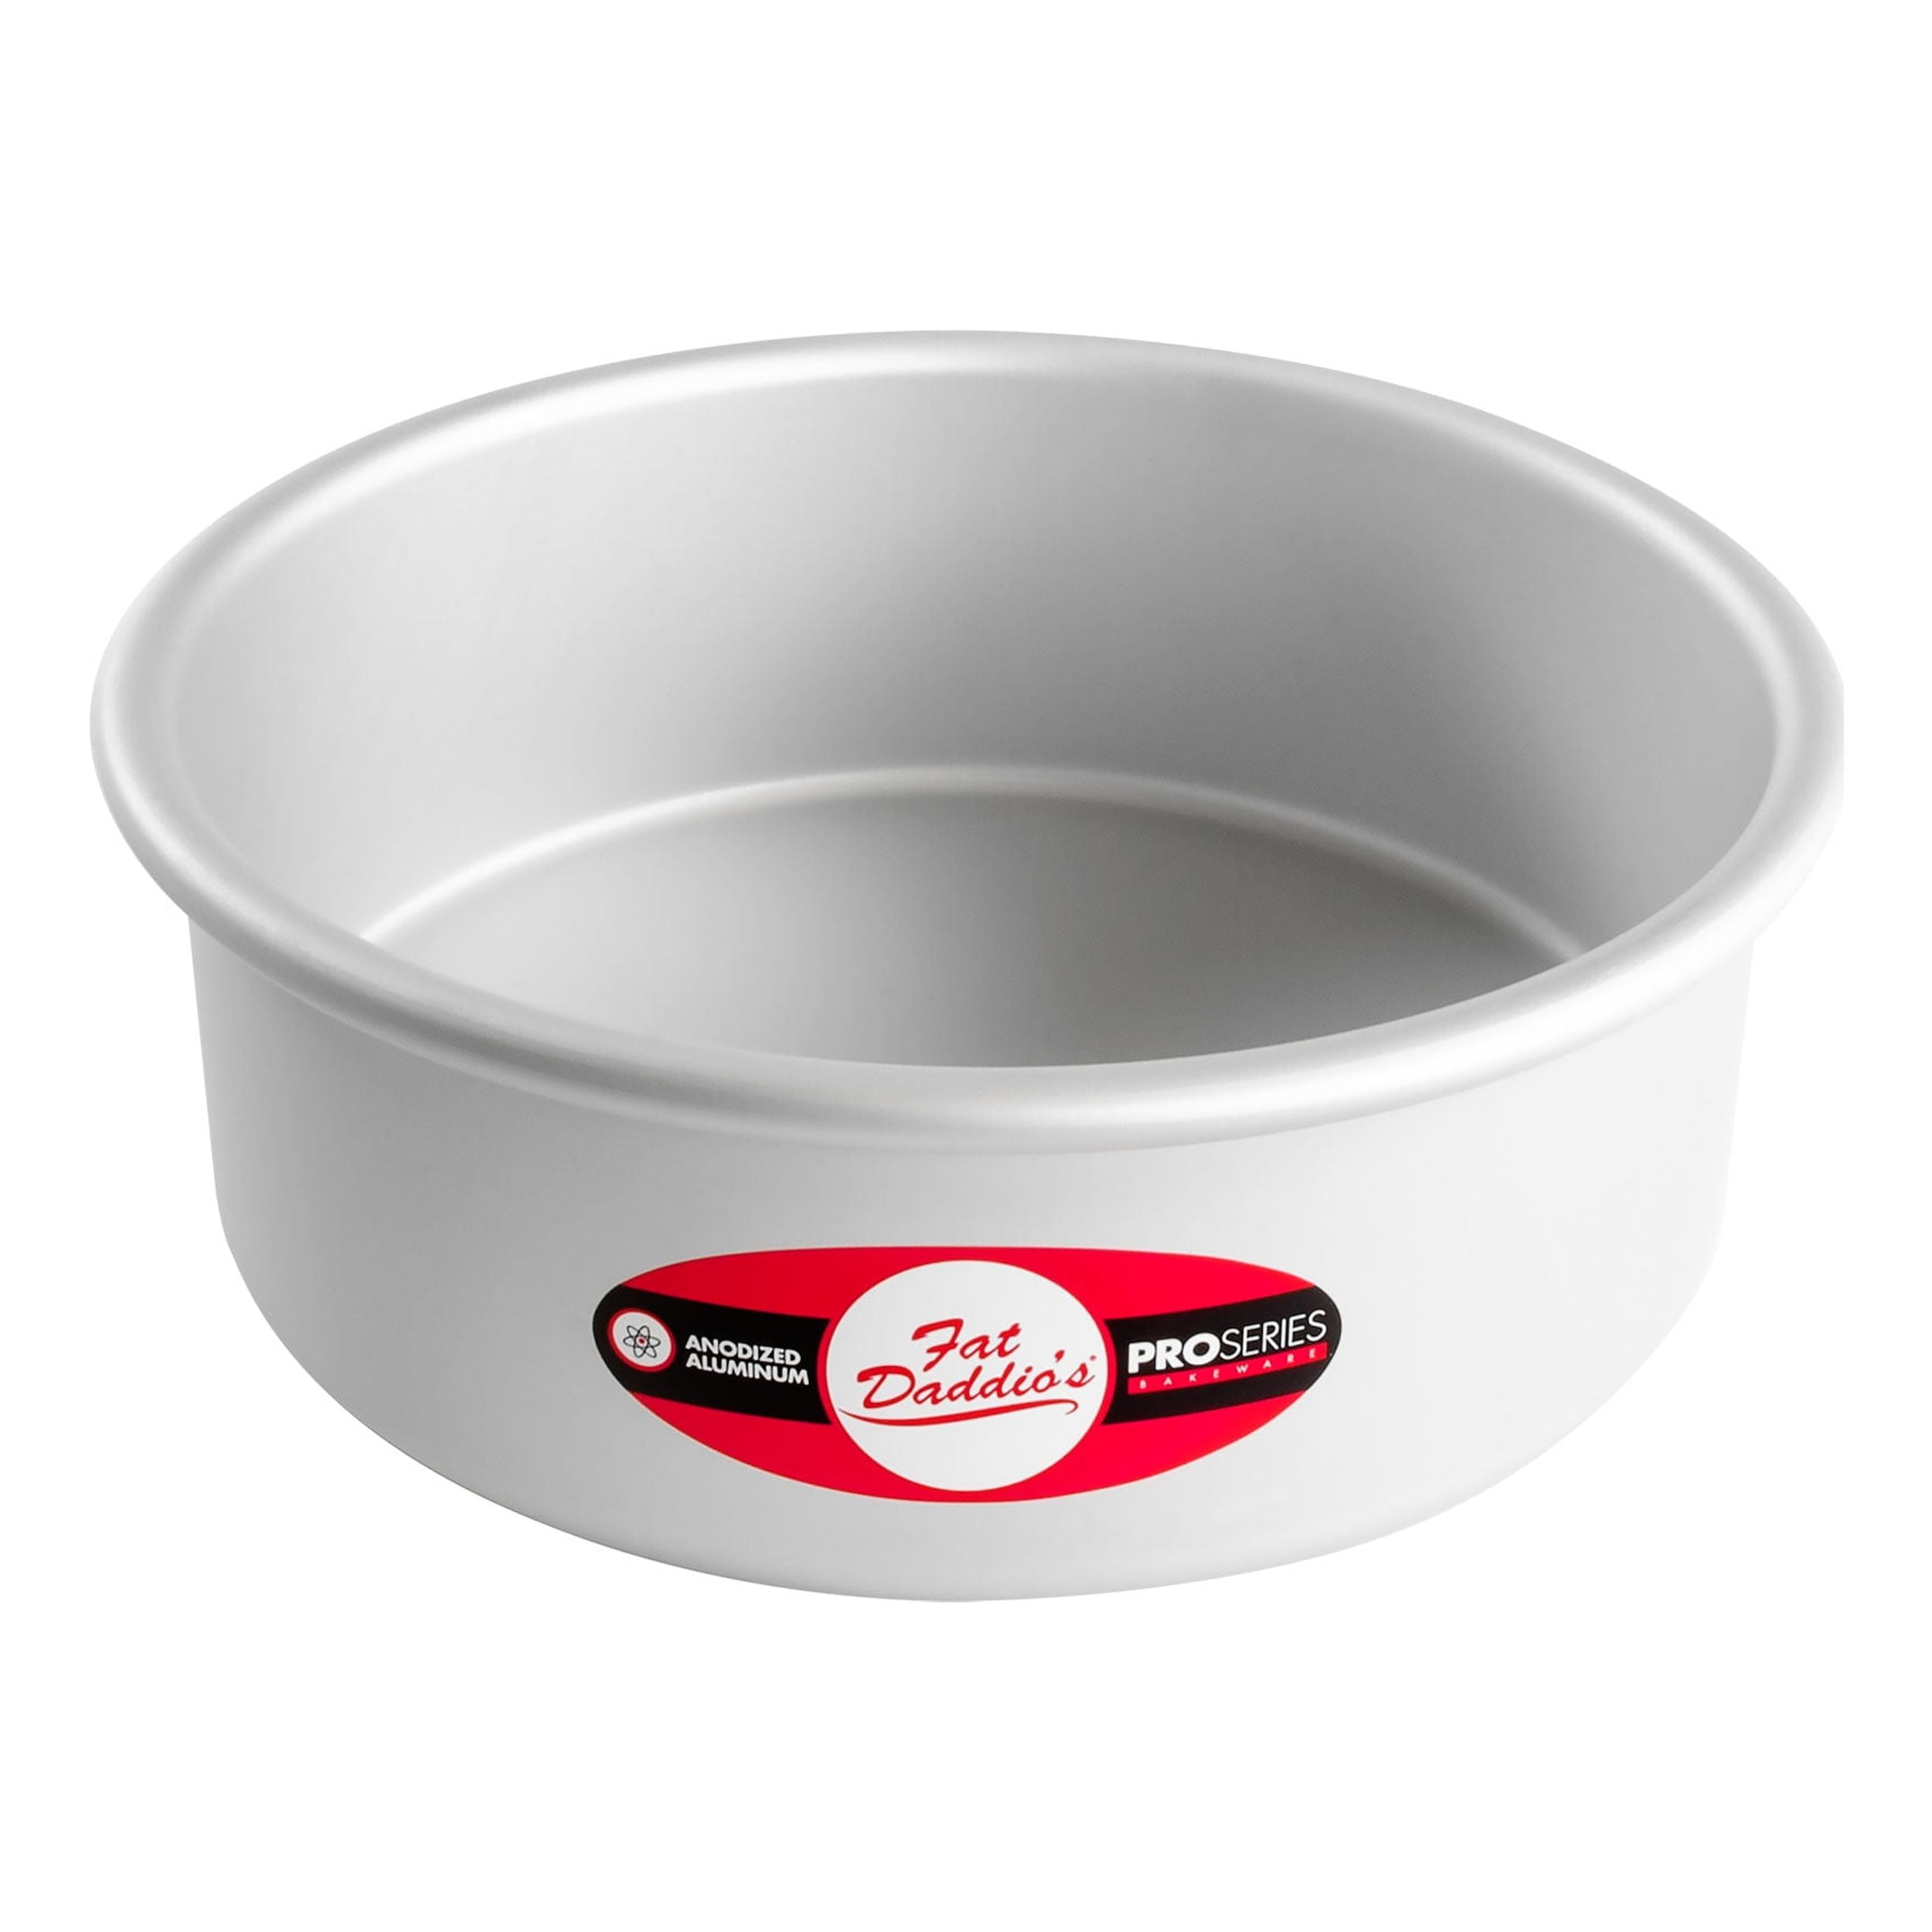 Fat Daddio's PRD-83 Anodized Aluminum Round Cake Pan, 8 x 3 inch 